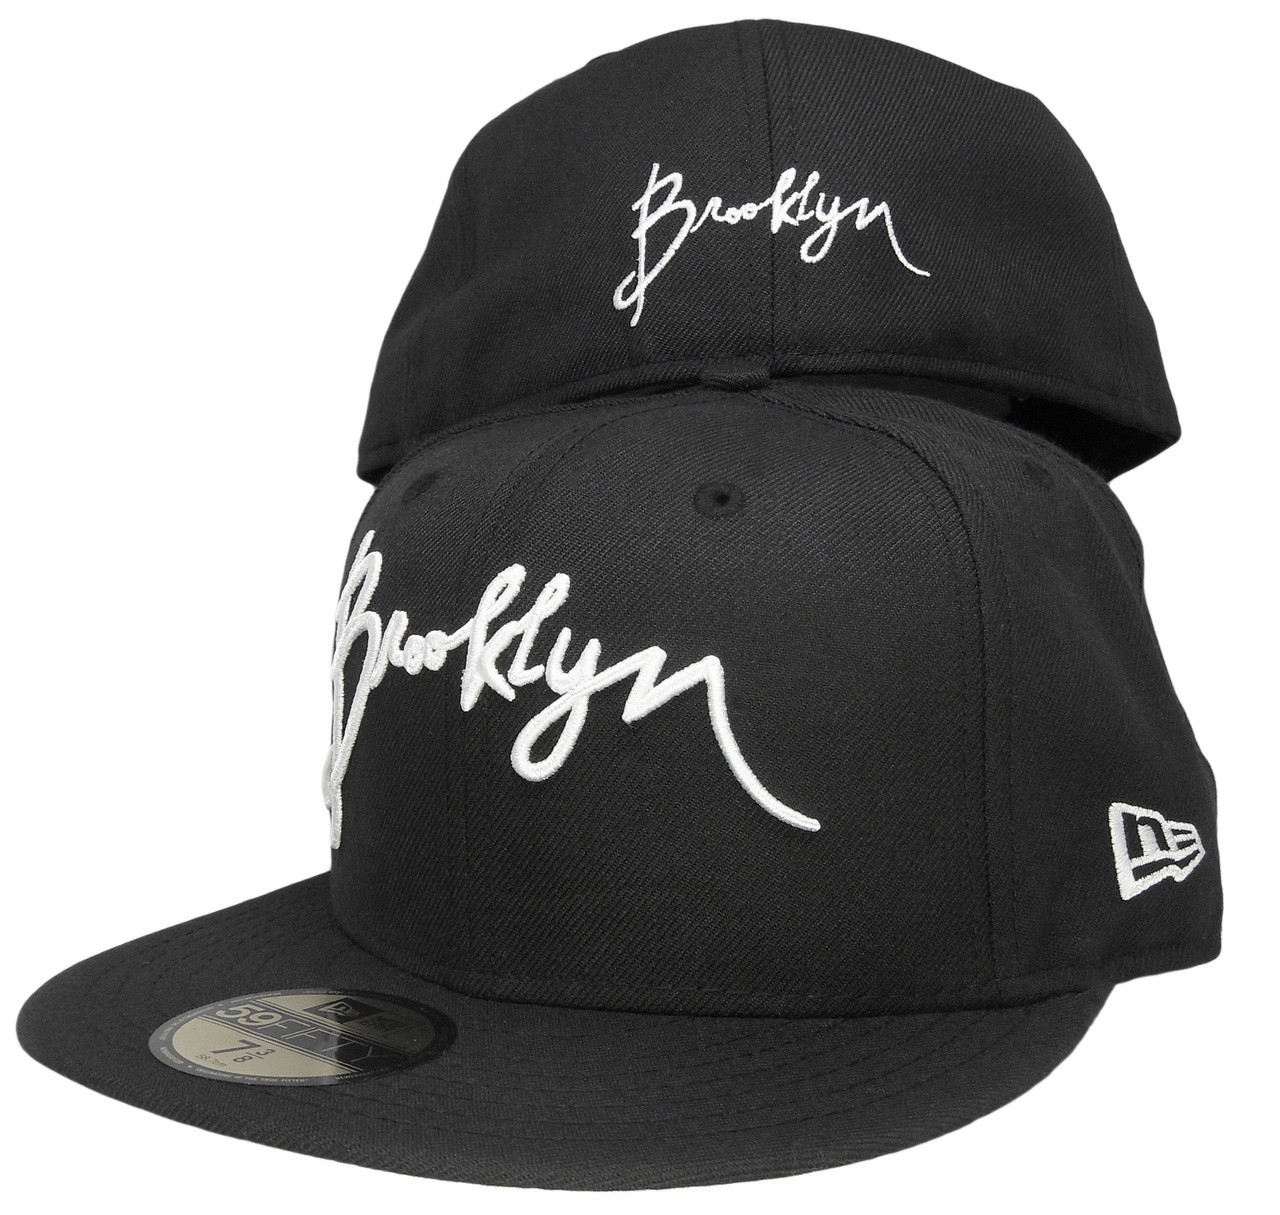 Script Brooklyn New Era 59fifty Basic Fitted Hat Black White Ecapsunlimited Com